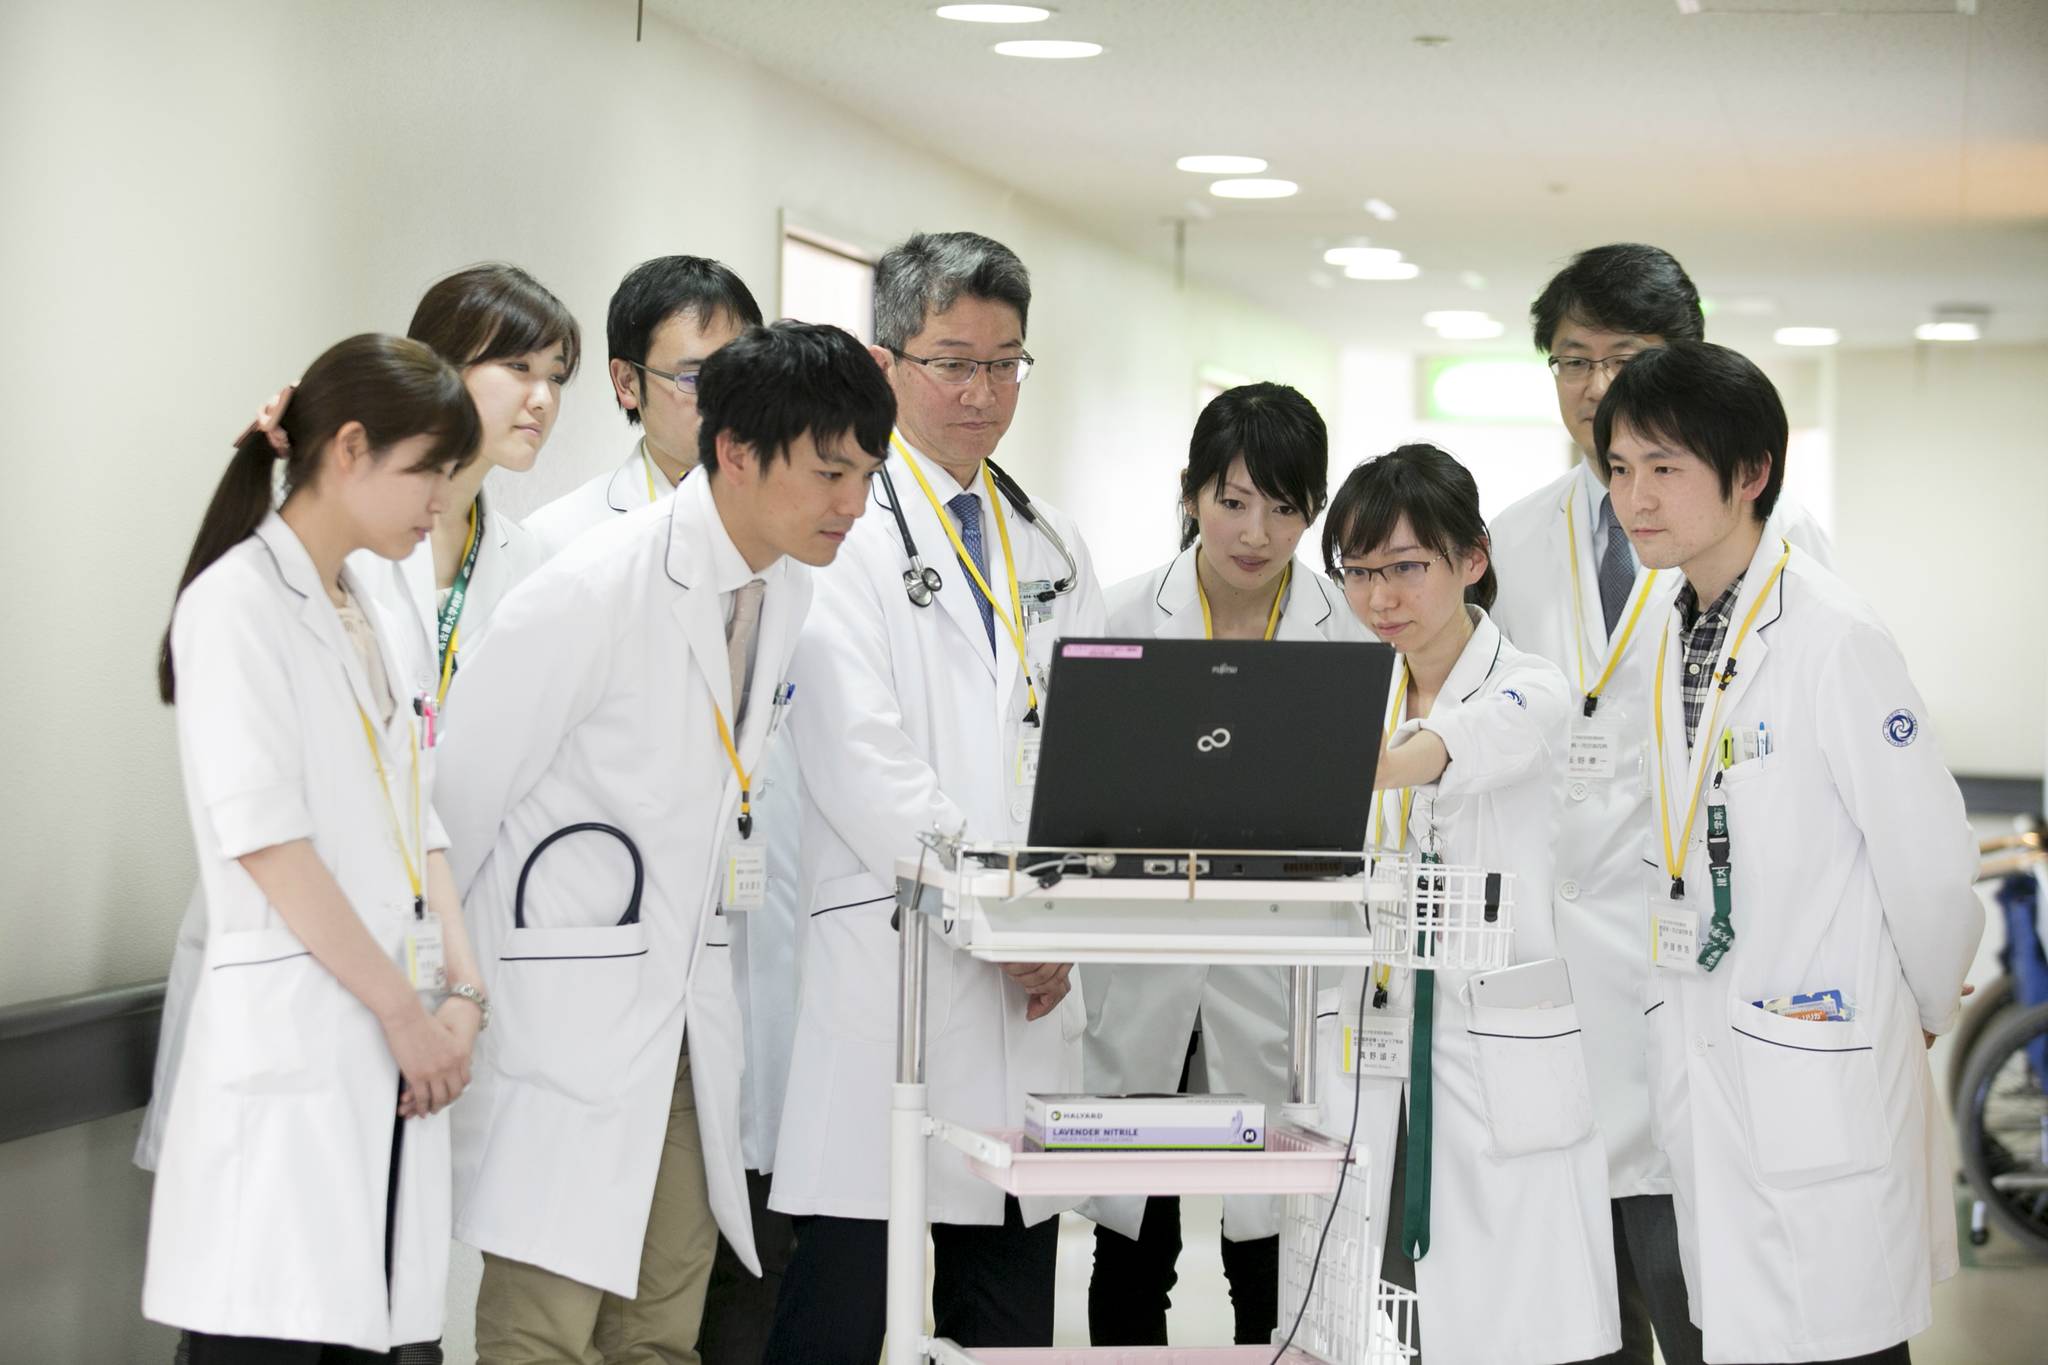 Japanese hospitals are using robots to do grunt work